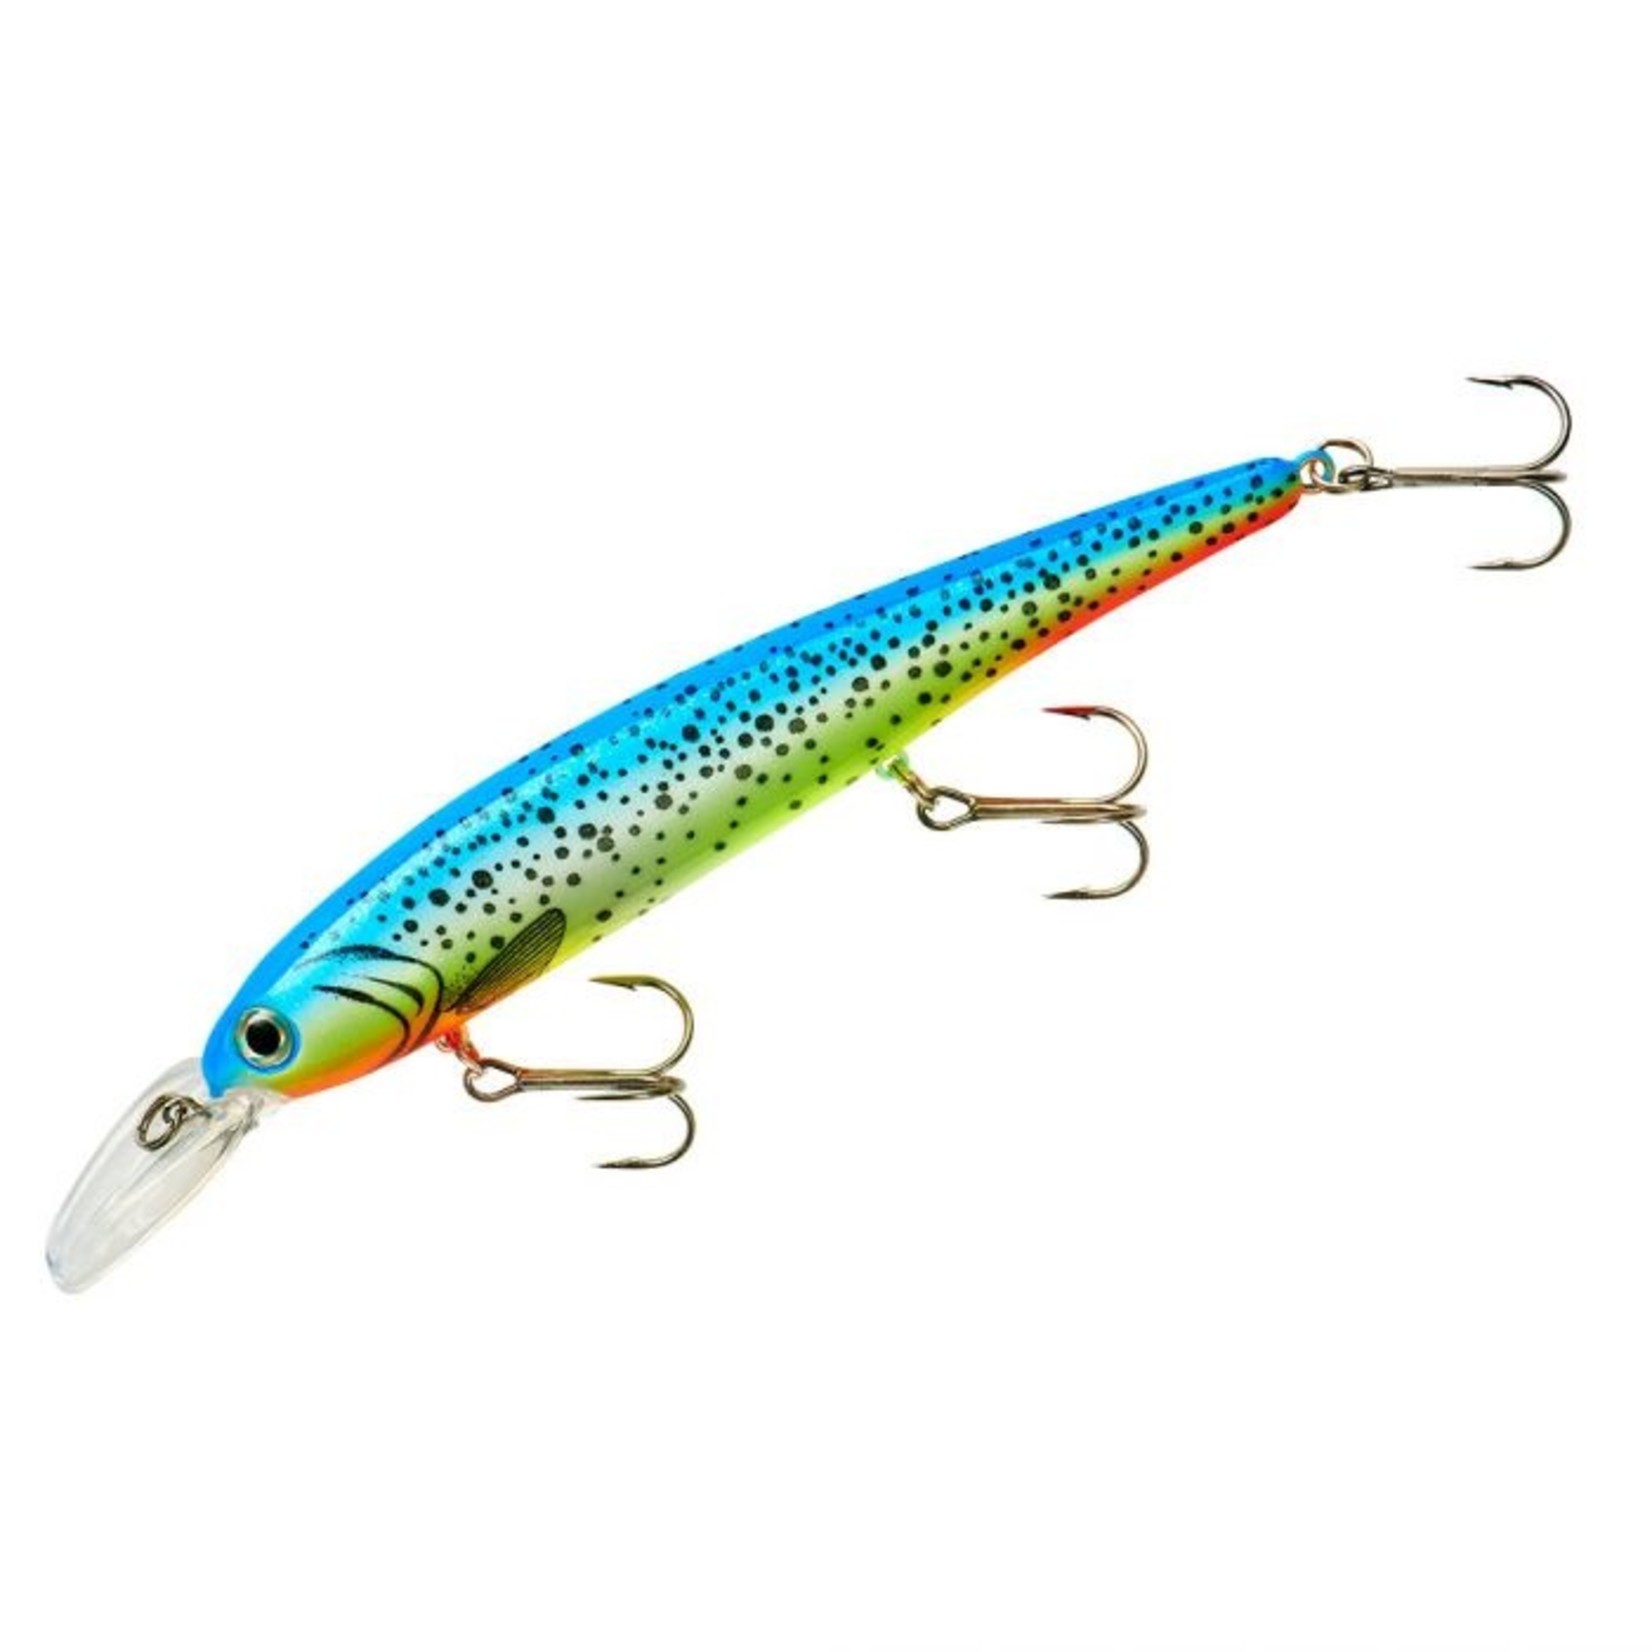 Deeper Diver Archives - Dreamweaver Lures